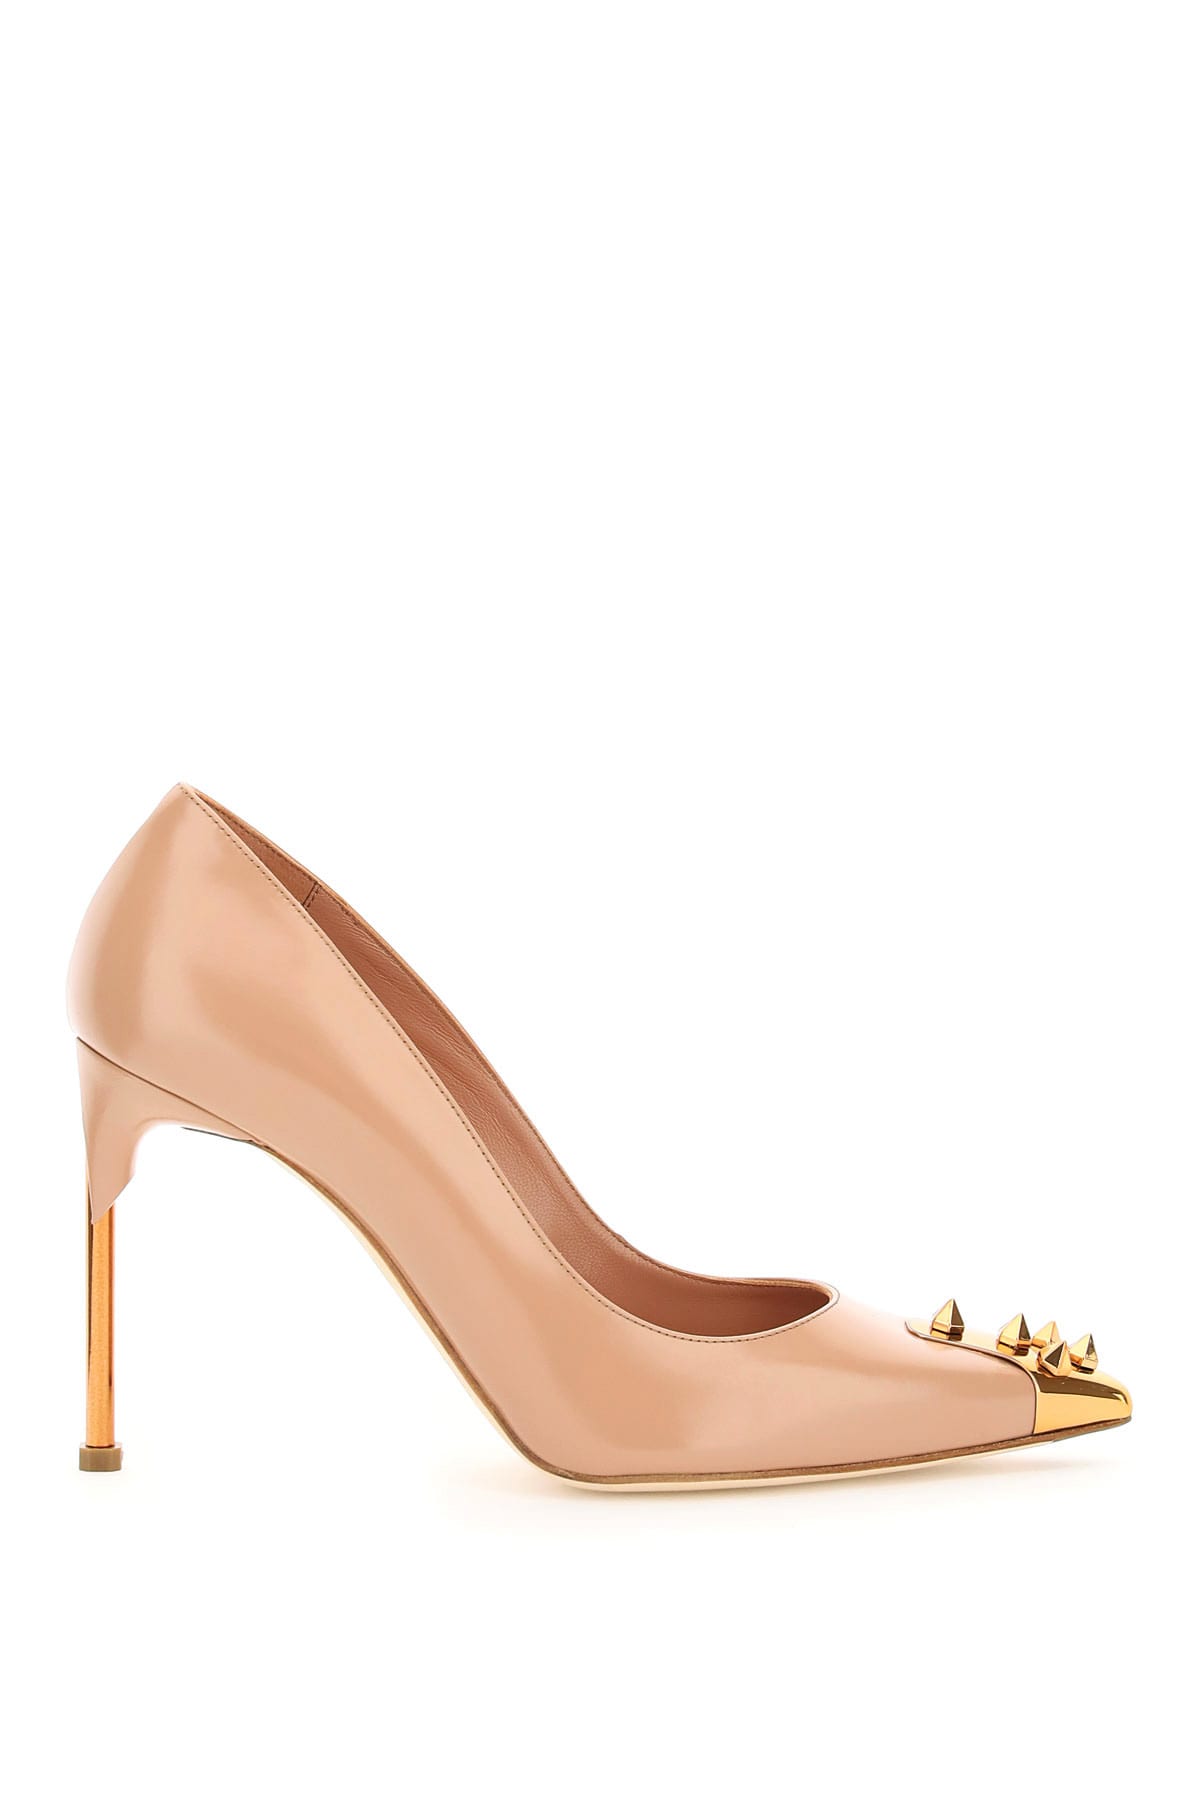 Buy Alexander McQueen Leather Pumps With Studs online, shop Alexander McQueen shoes with free shipping